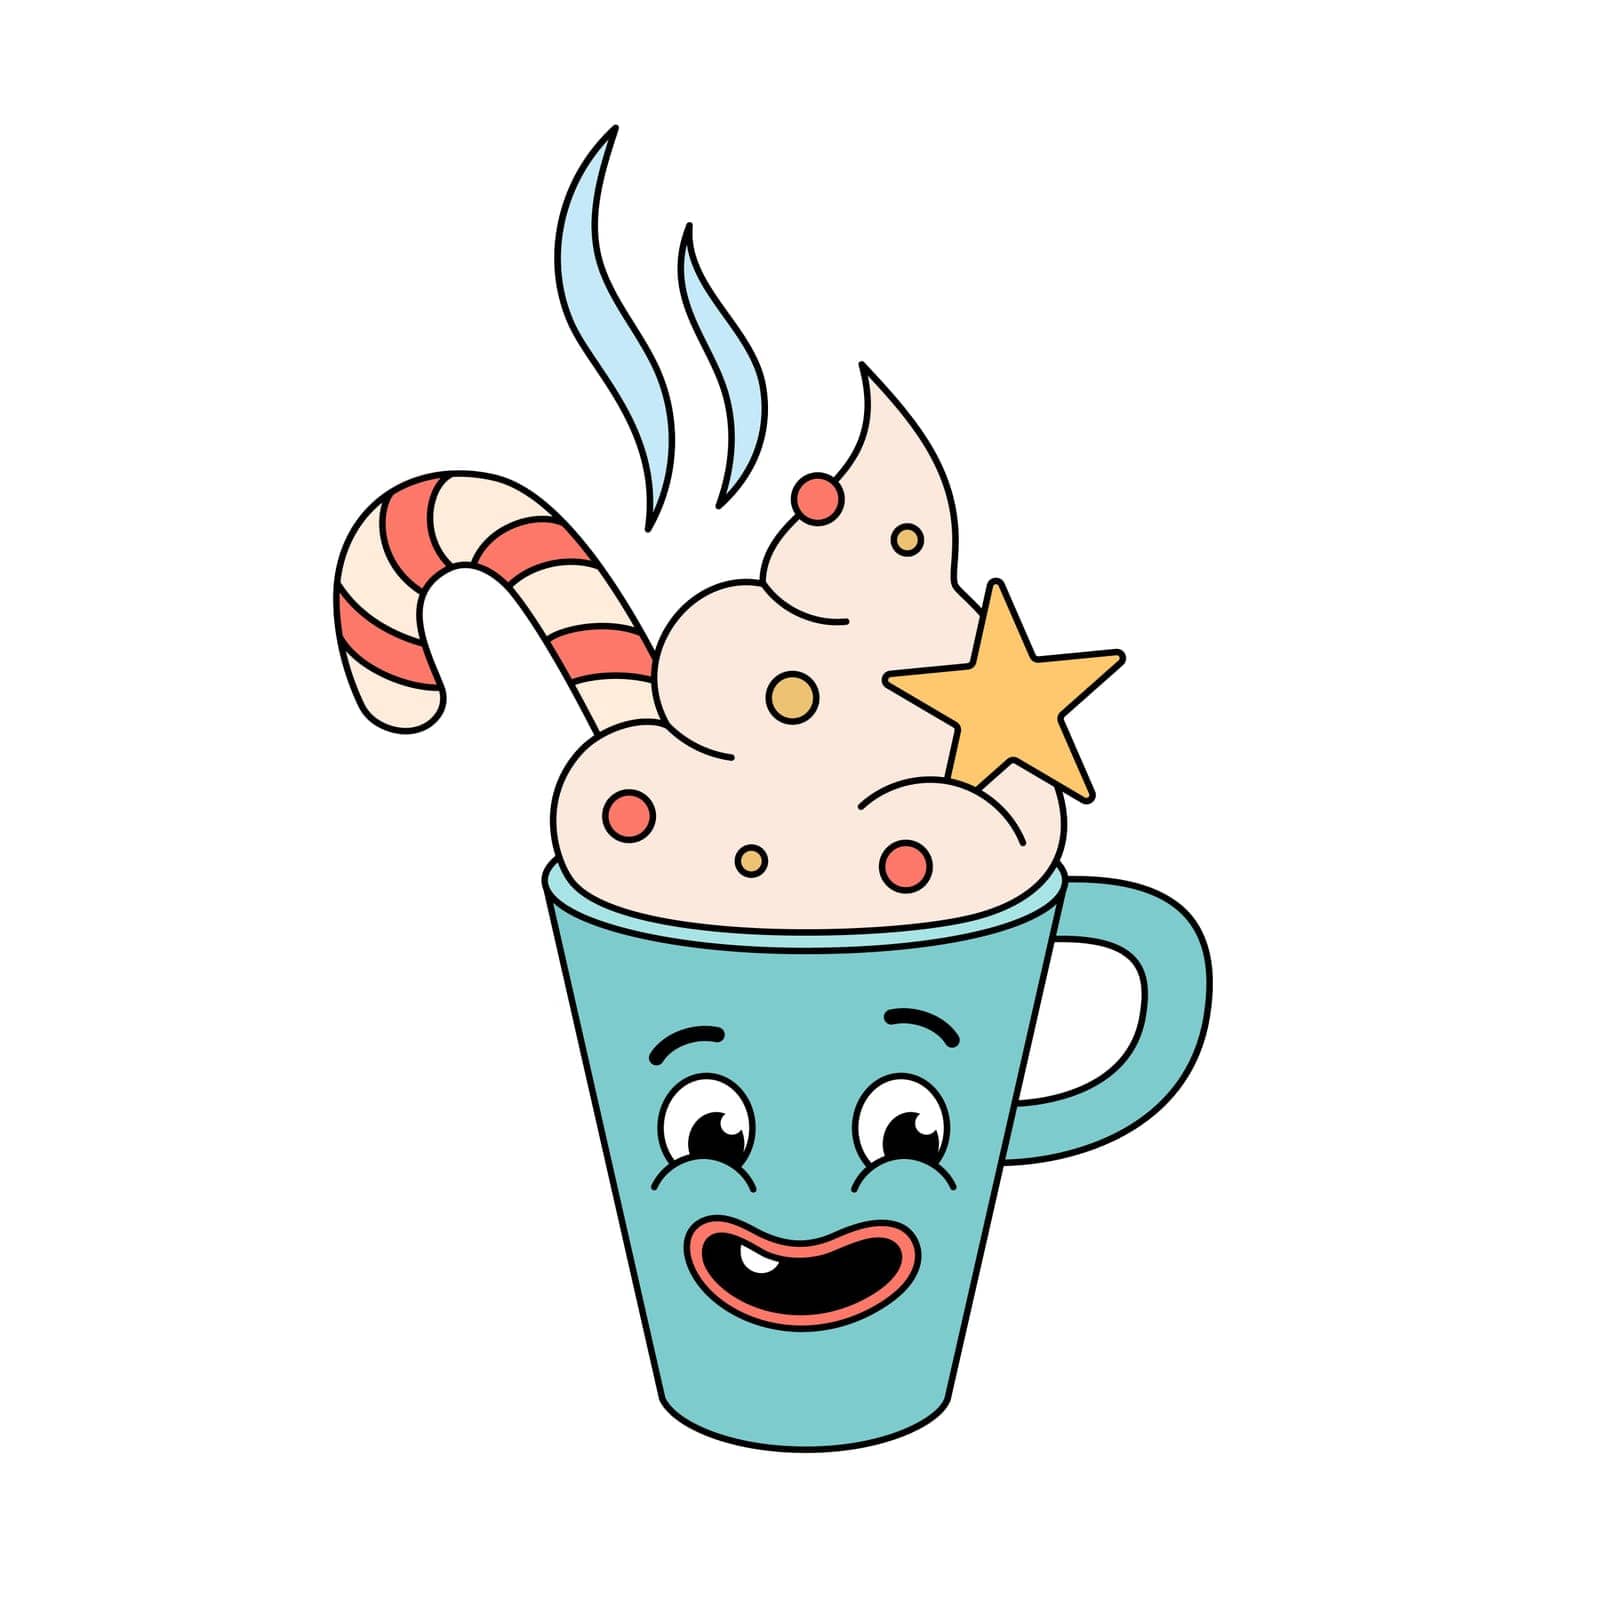 Groovy Christmas drink character. Retro groovy cartoon character in doodle style. Mug with candy cane, whipped cream, hot beverage. Vector illustration isolated on white. Christmas greeting card.